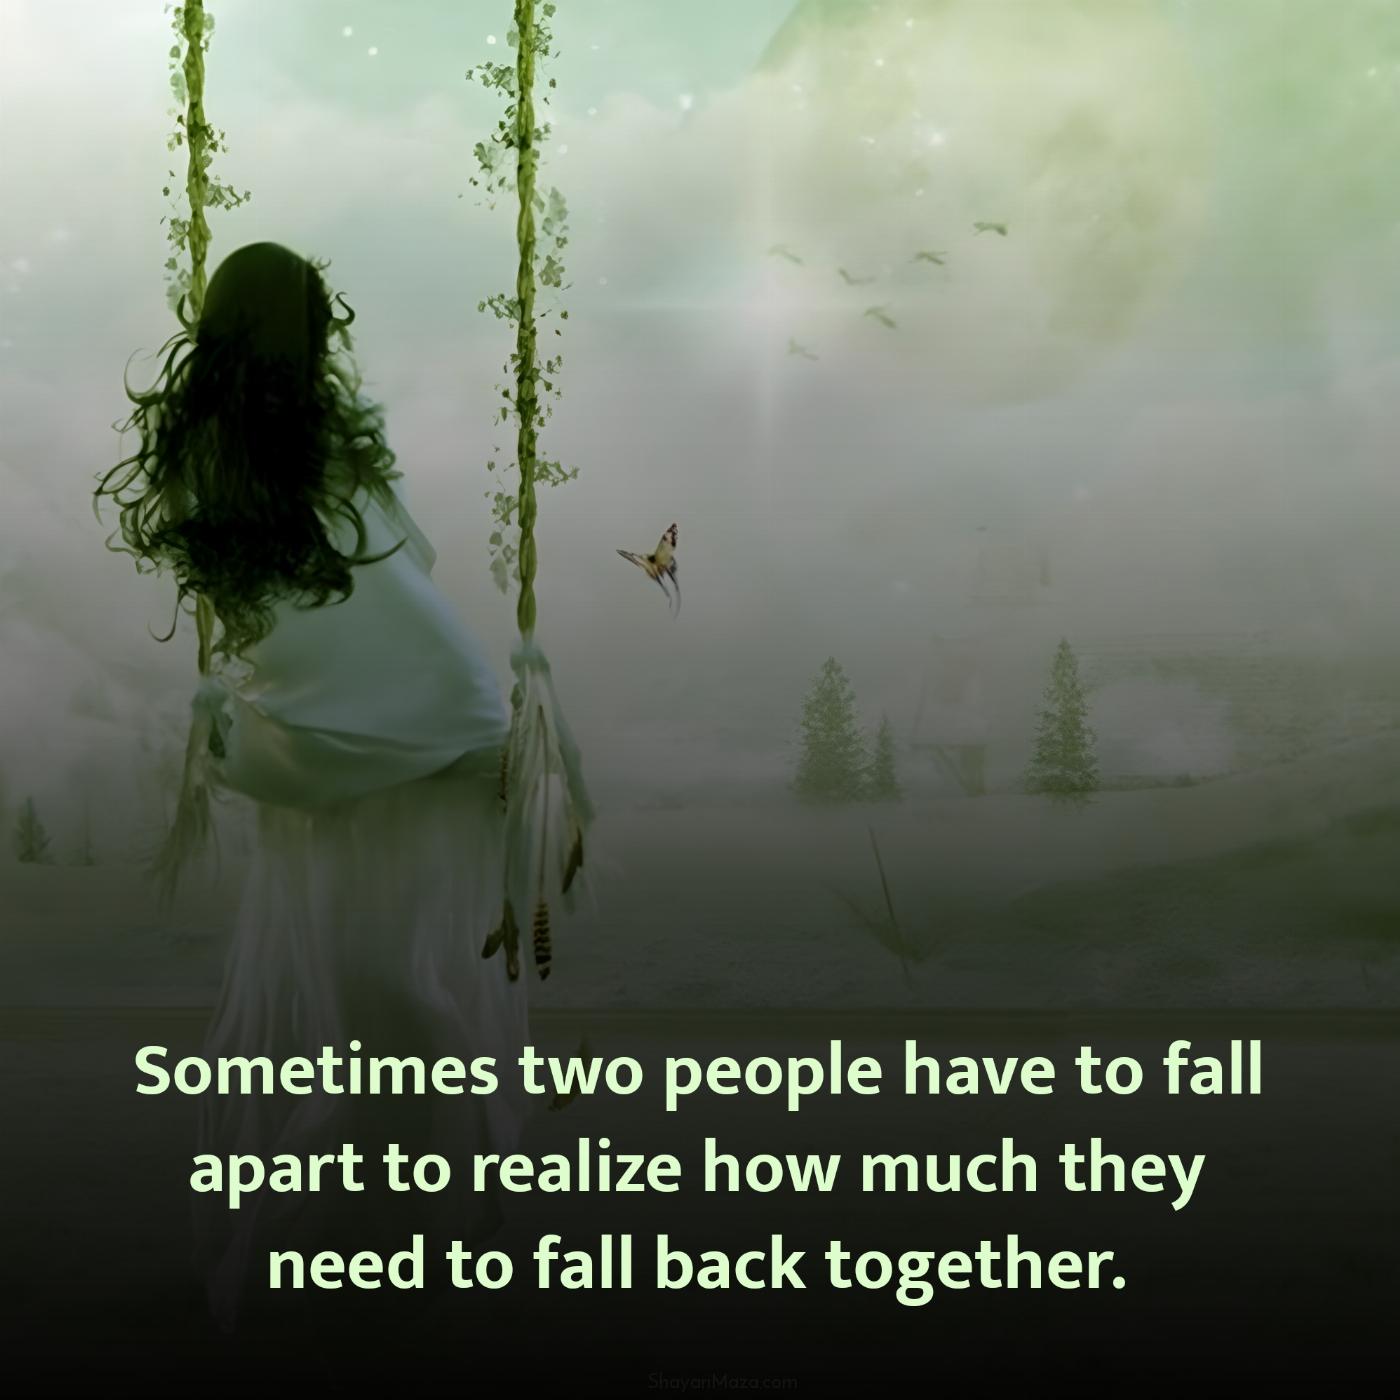 Sometimes two people have to fall apart to realize